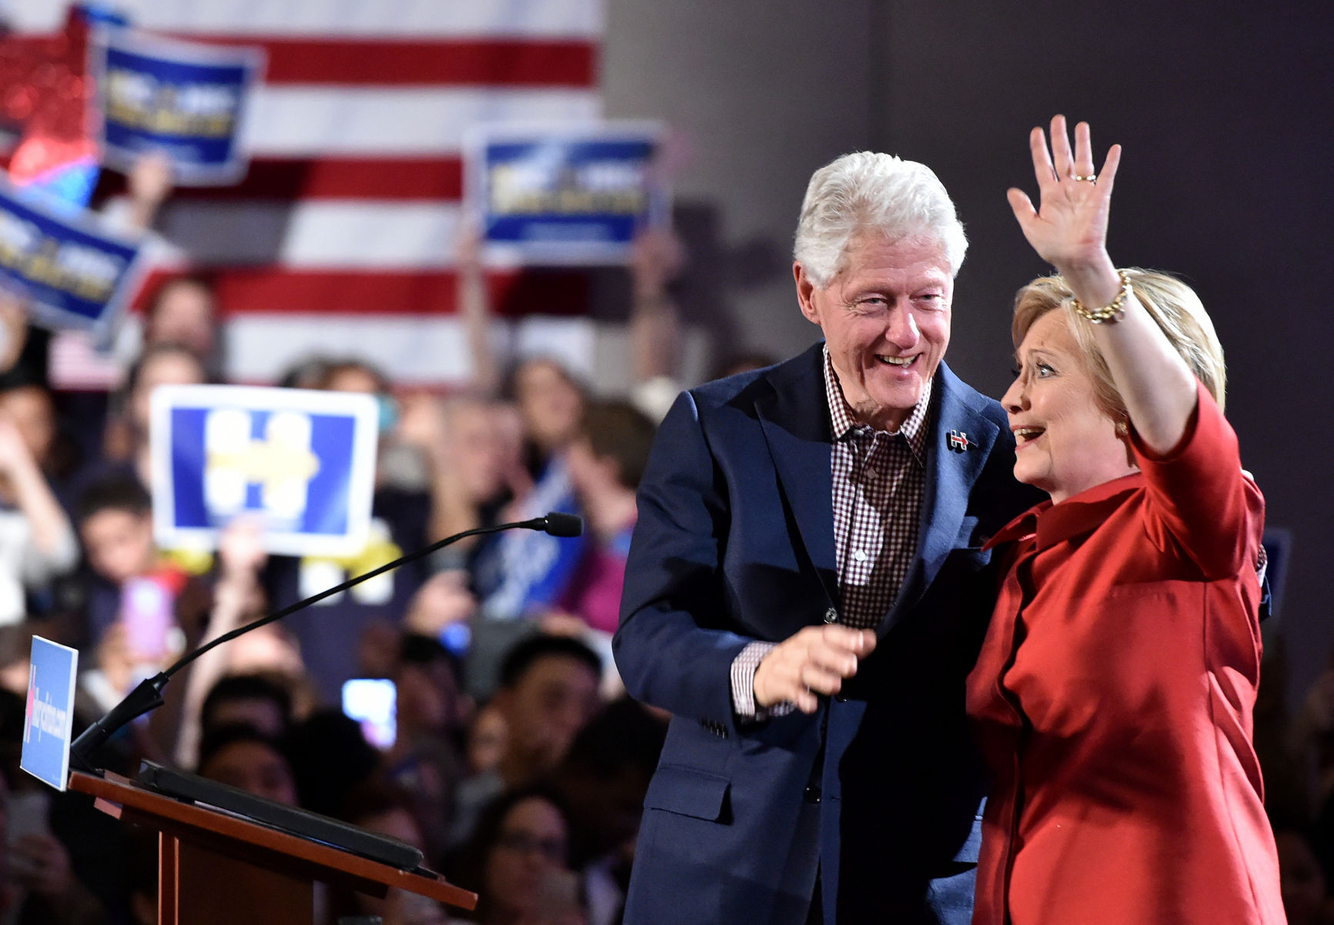 Hillary and Bill Clinton arrive for a campaign event in Las Vegas.